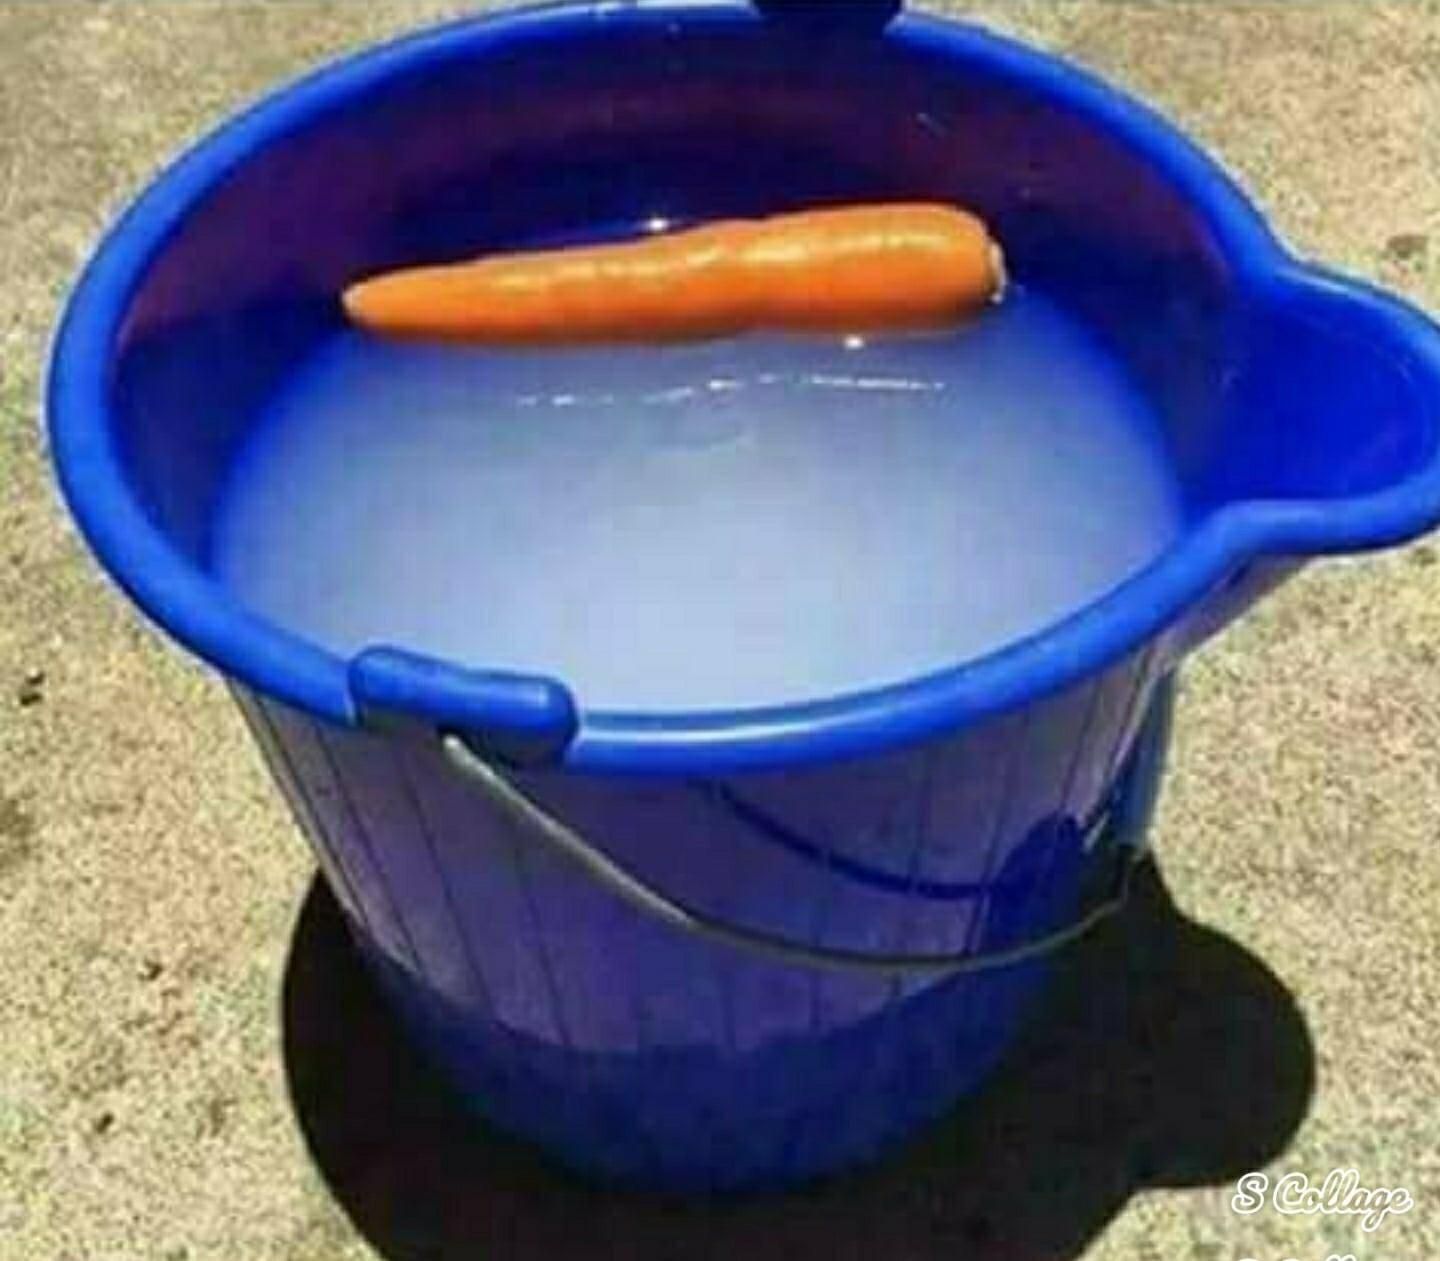 Snowman for sale. Needs minor repairs or can be used for parts .. $35 or best offer.